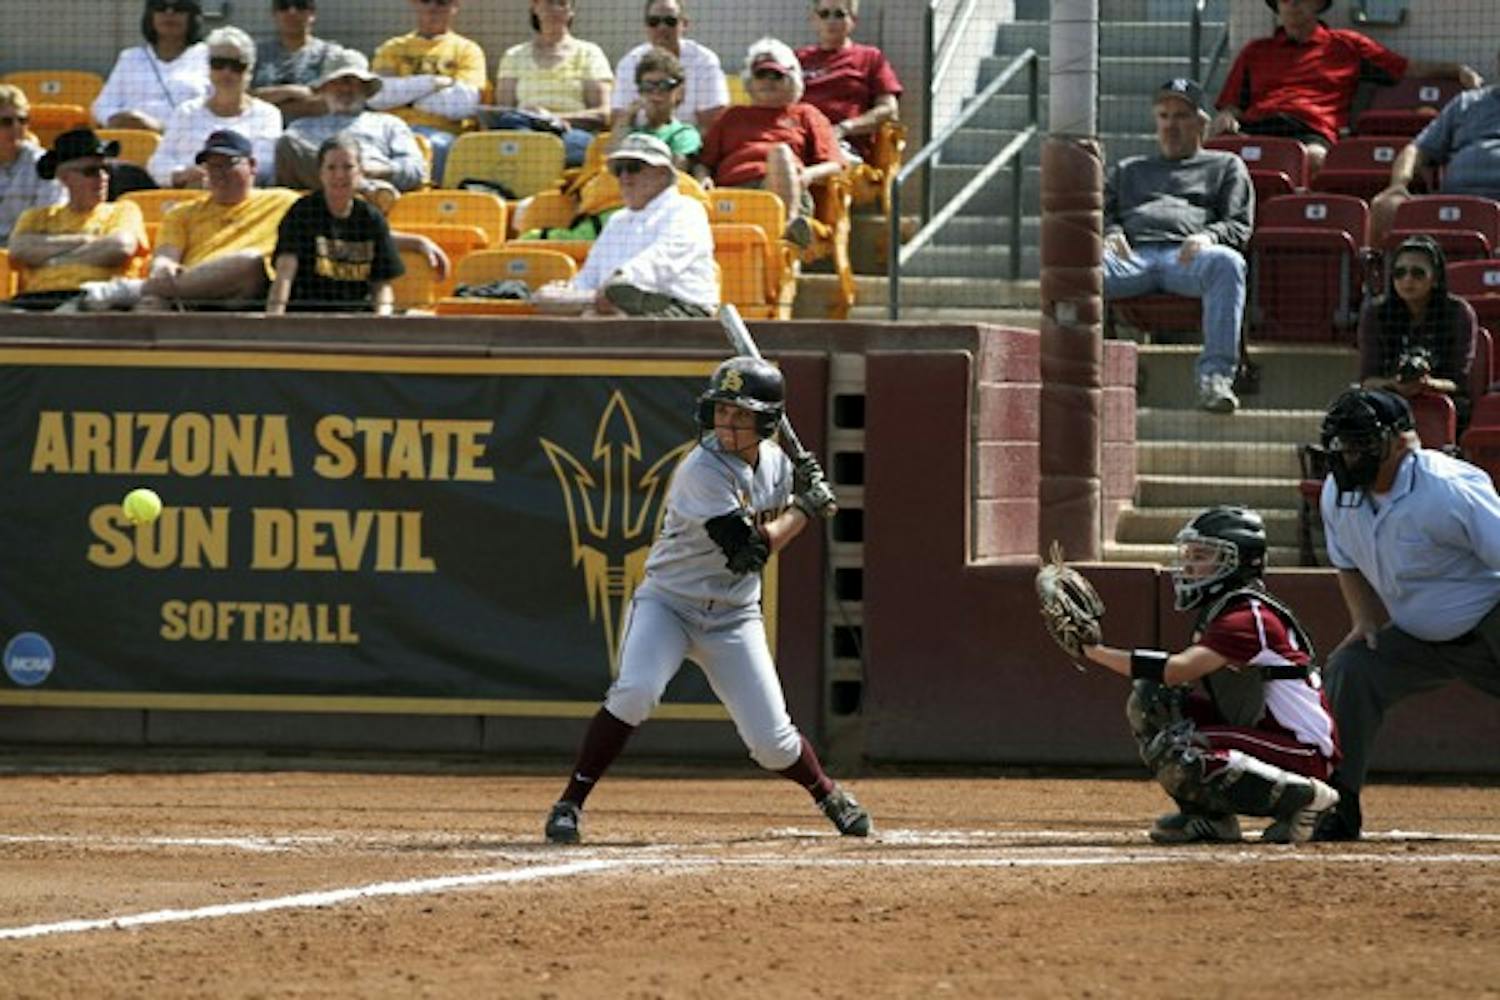 Katelyn Boyd prepares to take a swing in a game against New Mexico State on March 11. Boyd and the Sun Devils will travel to California for the Judi Garman Classic in the team’s first road trip of the season. (Photo by Jenn Allen)